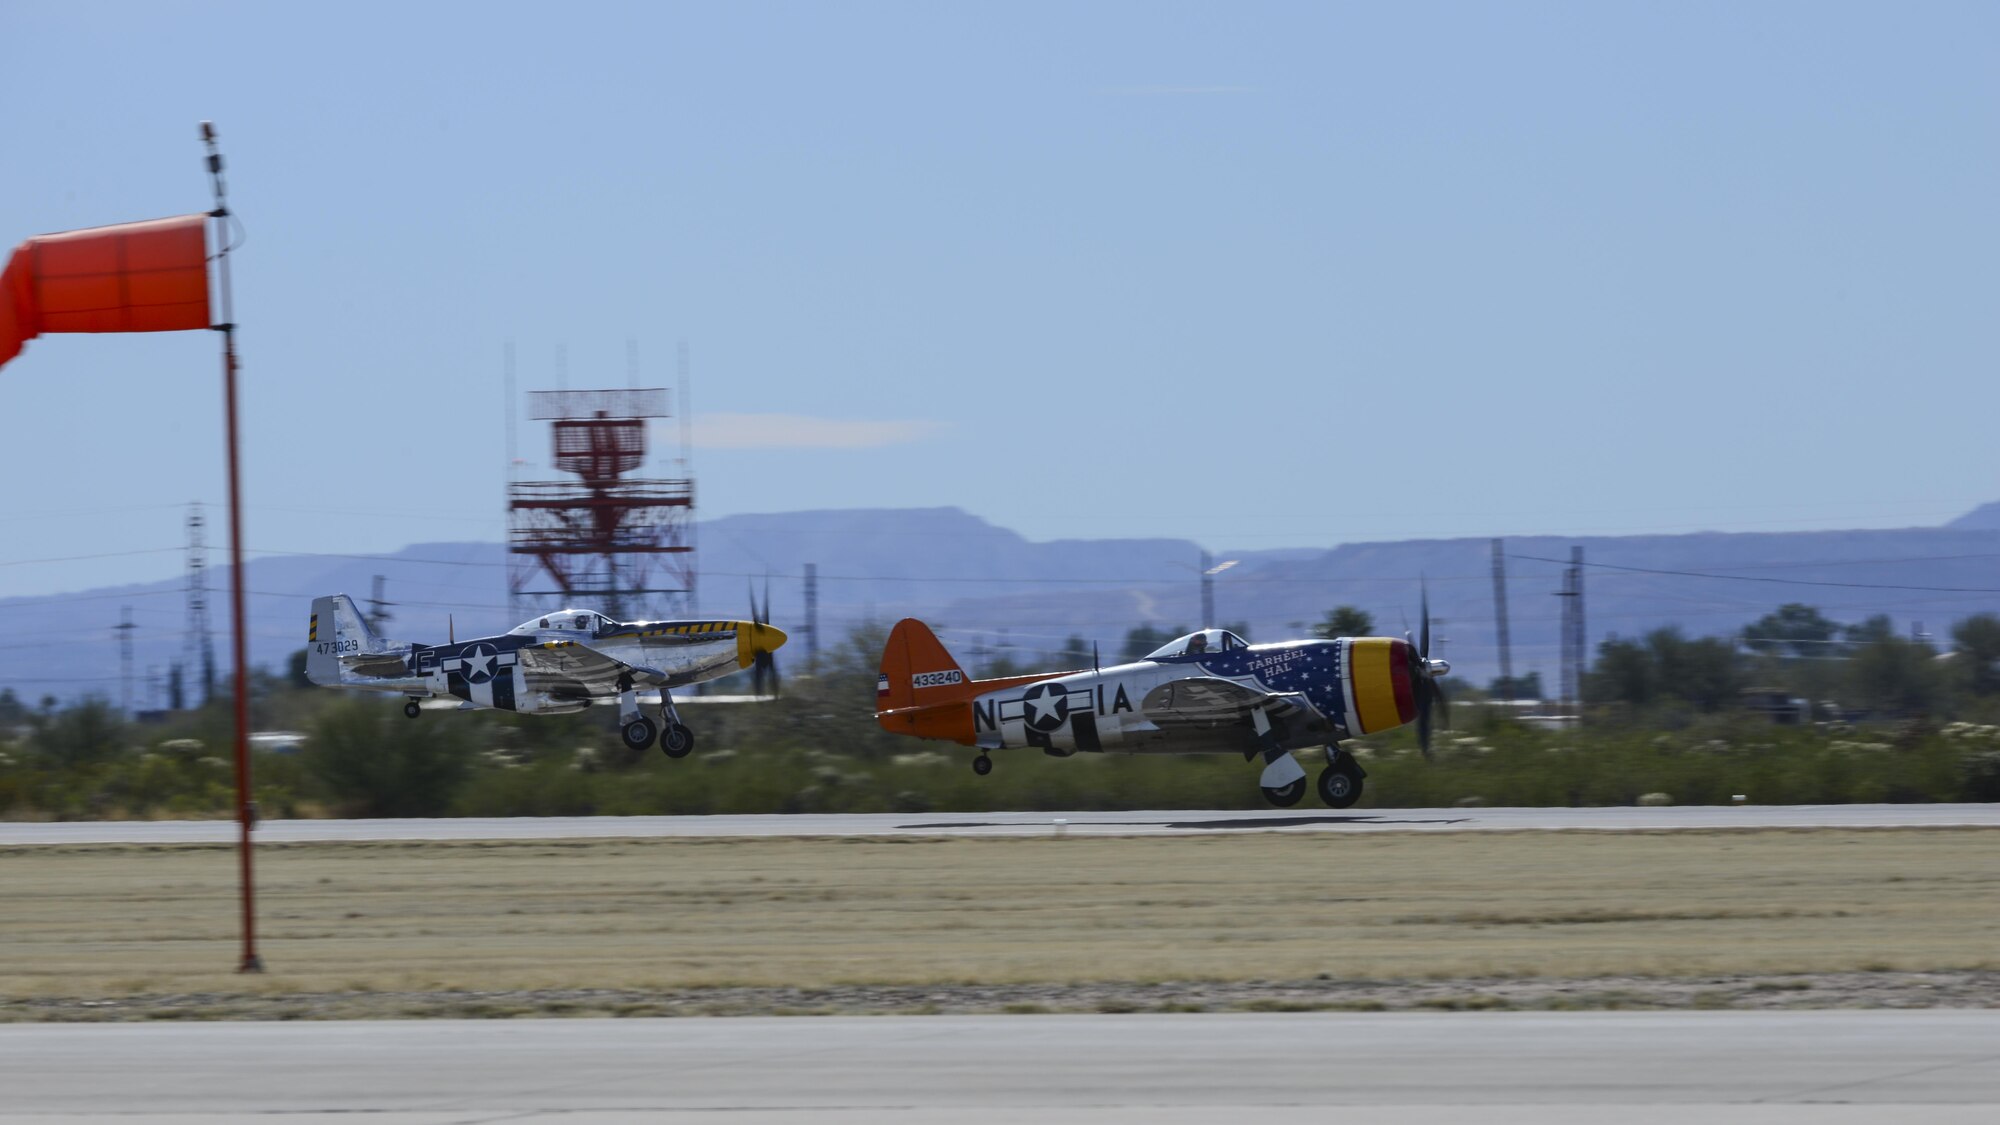 A P-51 Mustang and a P-47 Thunderbolt take off during the 2017 Heritage Flight Training and Certification Course at Davis-Monthan Air Force Base, Ariz., Feb. 11, 2017. The annual aerial demonstration training event has been held at D-M since 2001 and featured aerial demonstrations from historical and modern fighter aircraft. (U.S. Air Force Photo by Airman 1st Class Nathan H. Barbour)